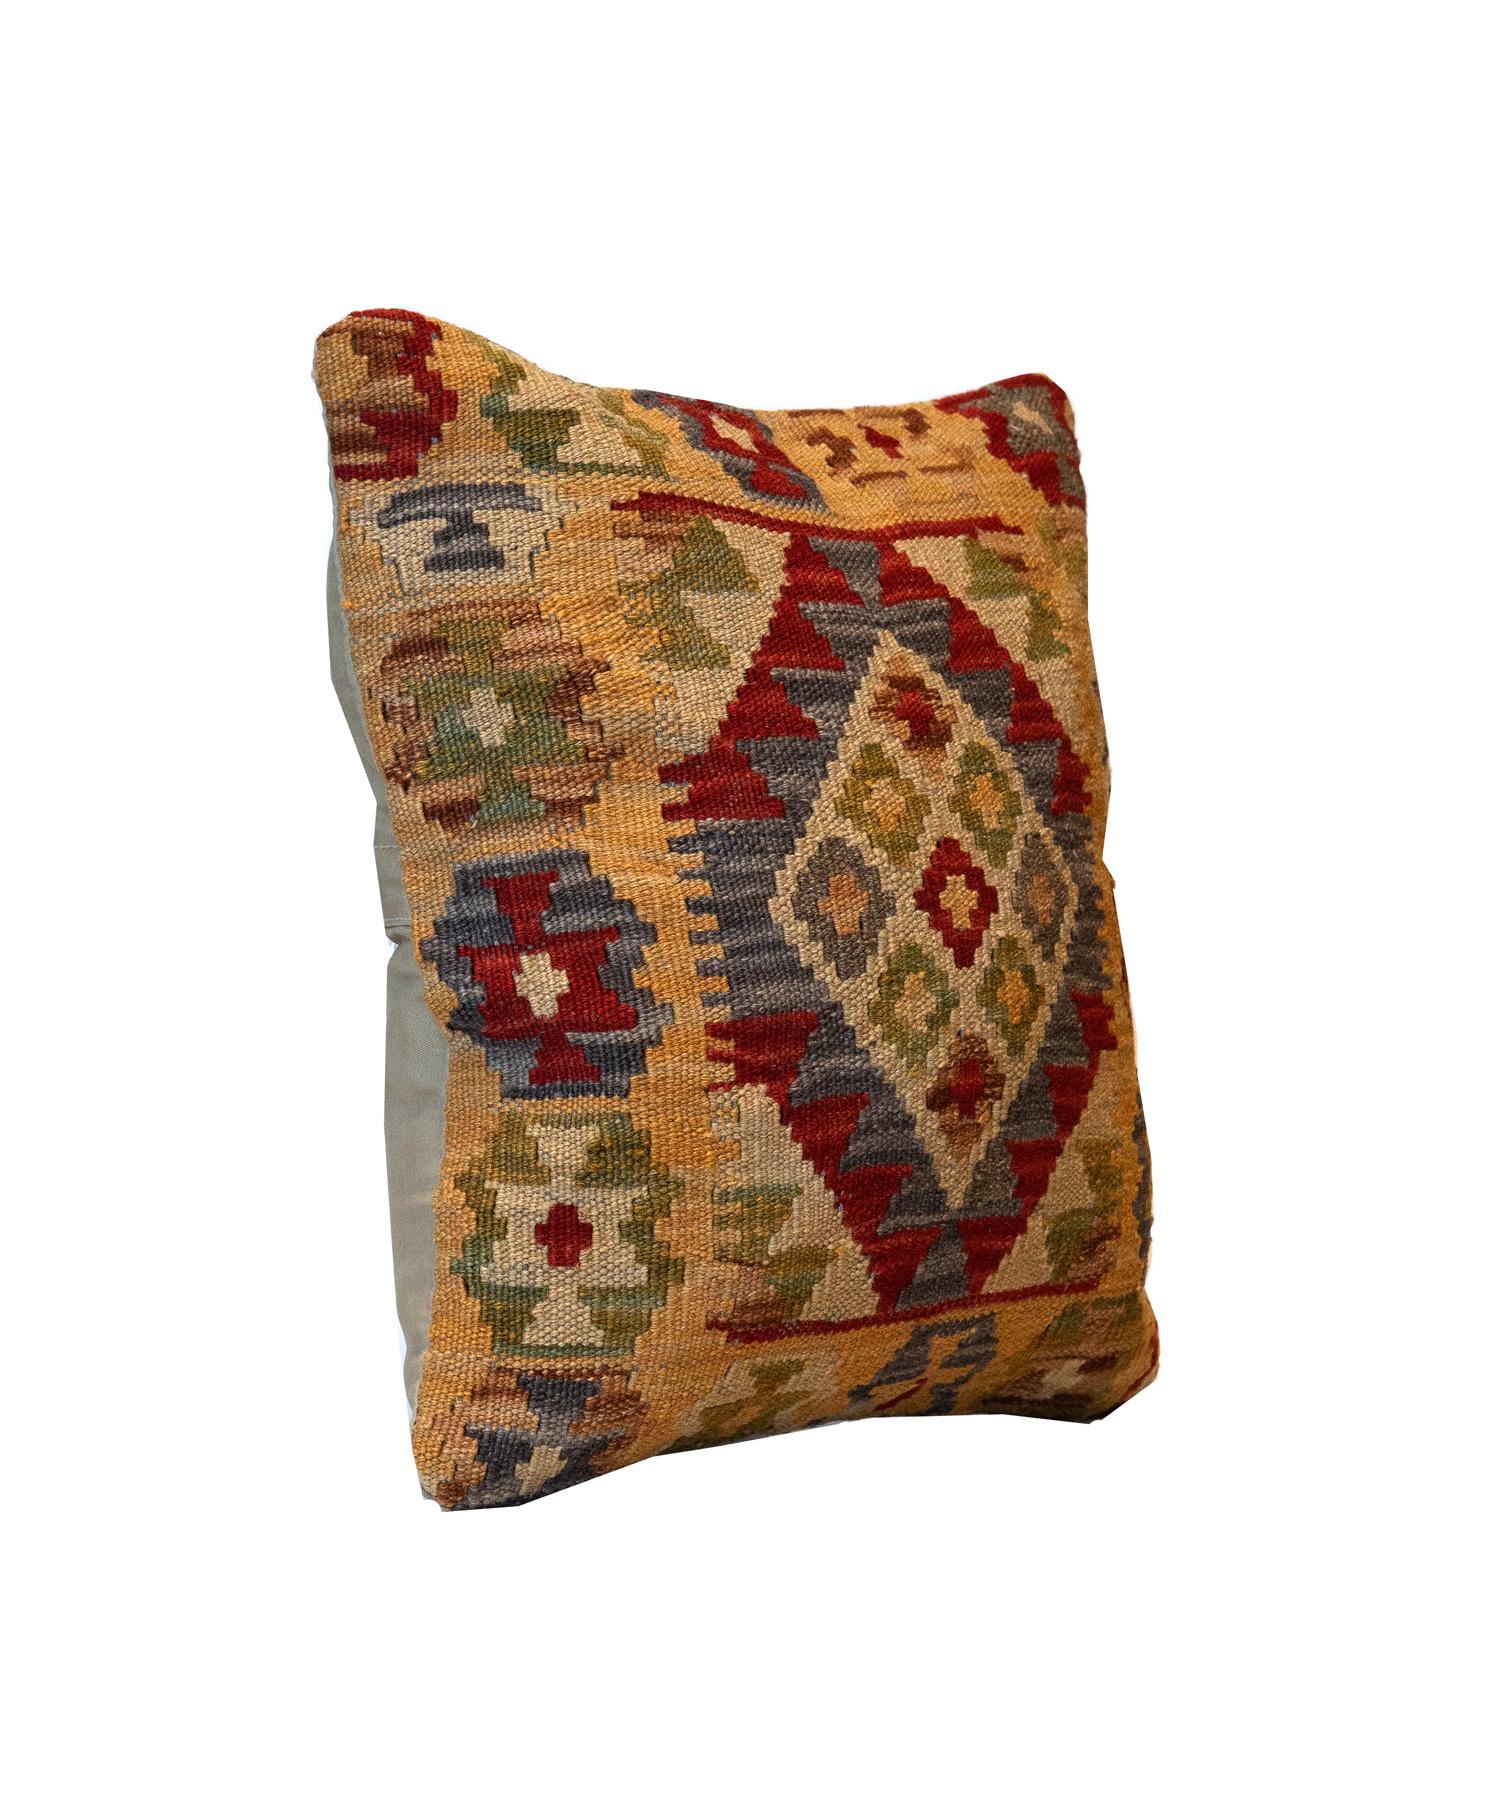 This traditional Kilim cushion cover has been handwoven with the traditional Kilim flat-weave technique. Featuring a geometric pattern woven in beige, cream, blue and red. Decorate your bed, sofa or armchair with this fantastic piece as a scatter